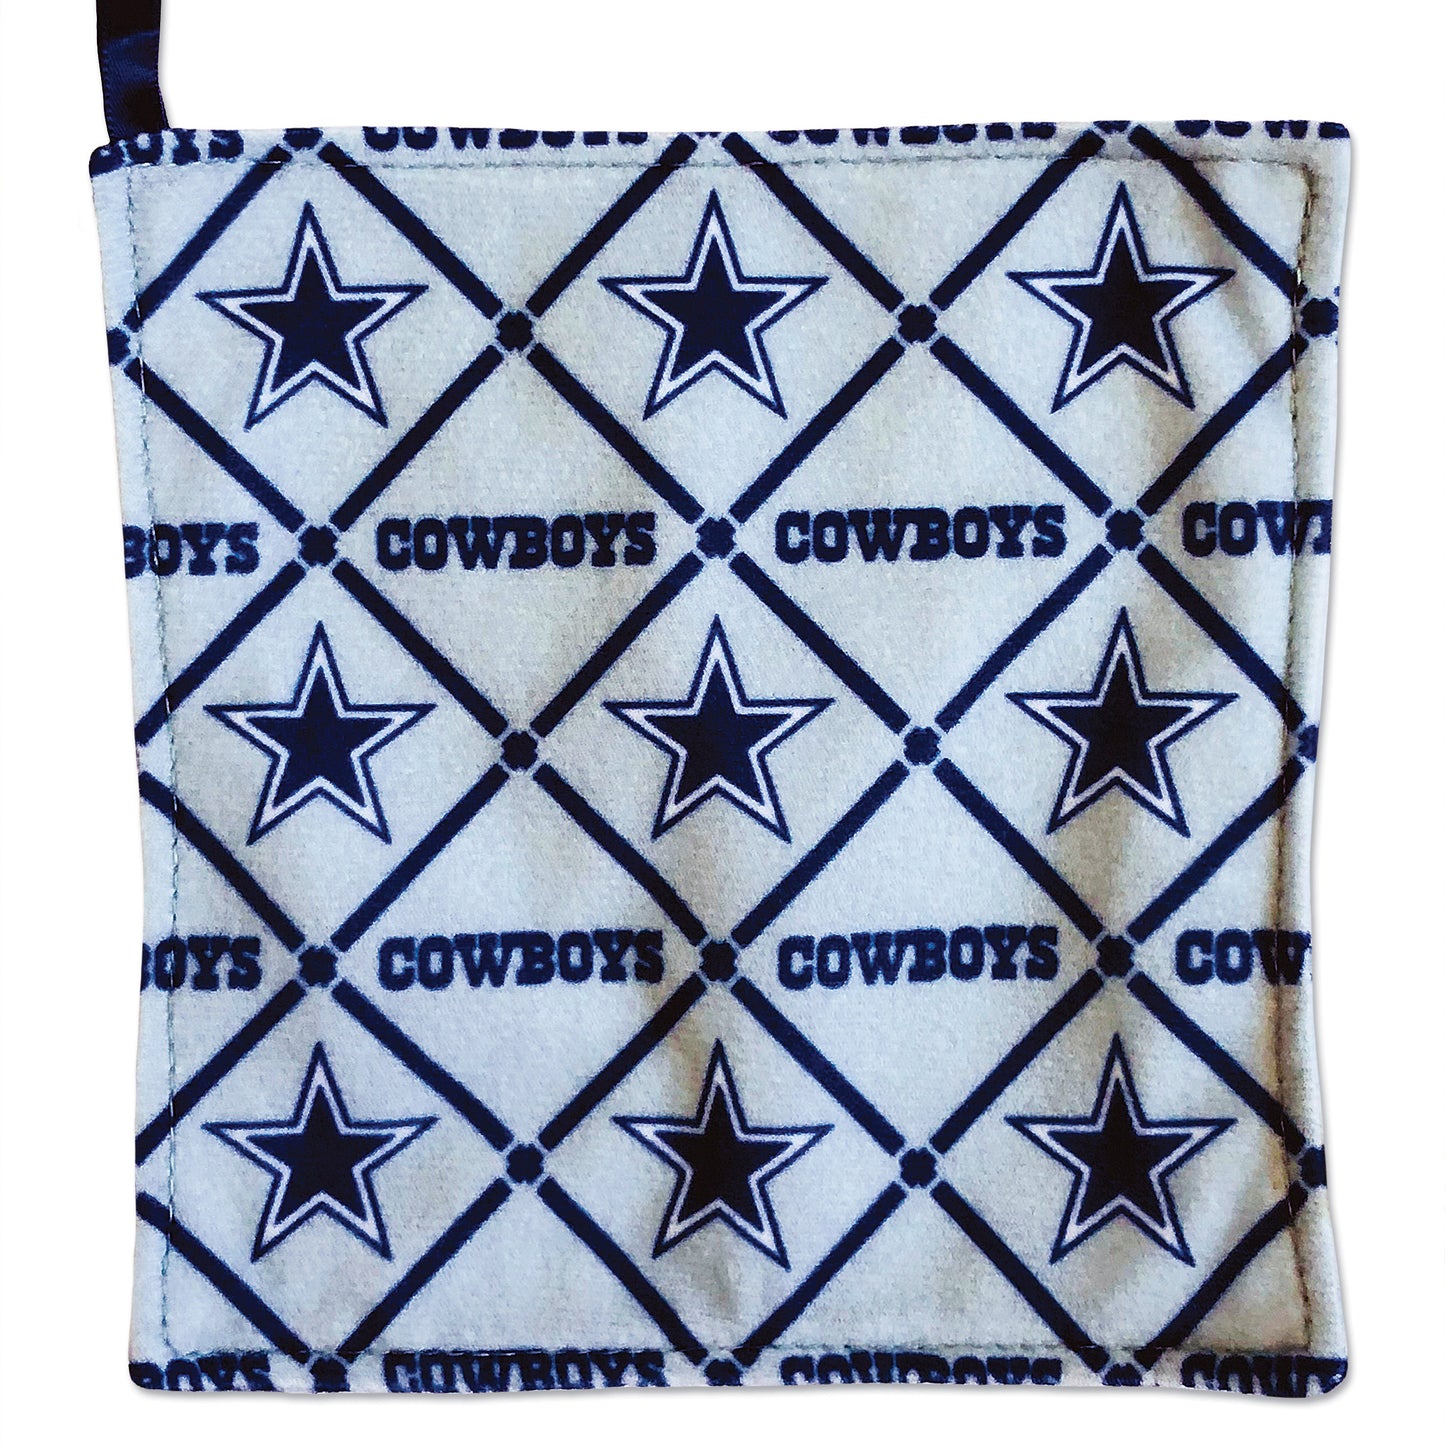 Dallas Cowboys licensed NFL Gift Set-Book with Rally Paper